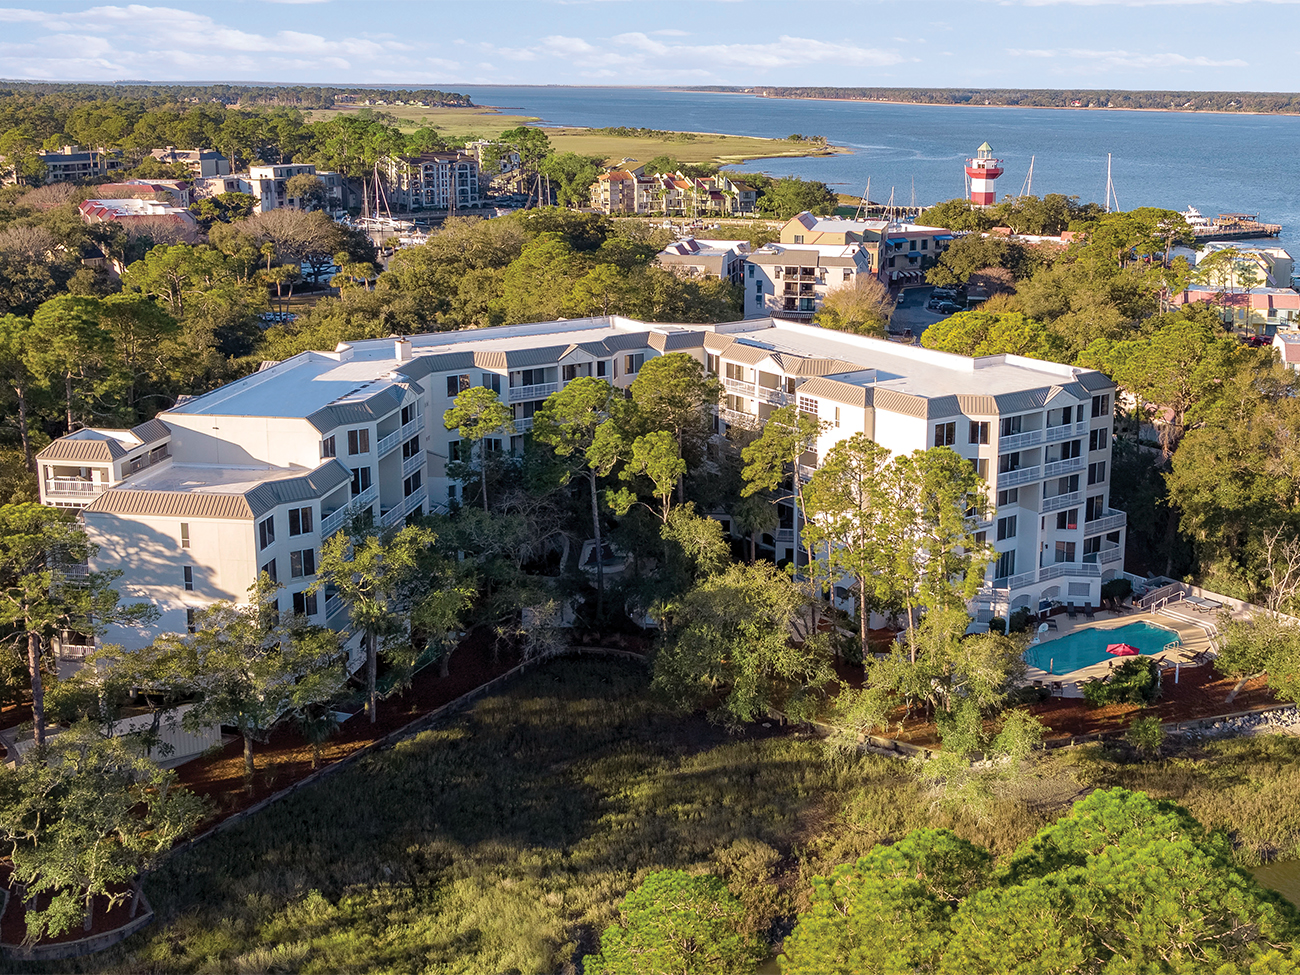 Marriott's Harbour Club Exterior Resort. Marriott's Harbour Club is located in Hilton Head Island, South Carolina United States.